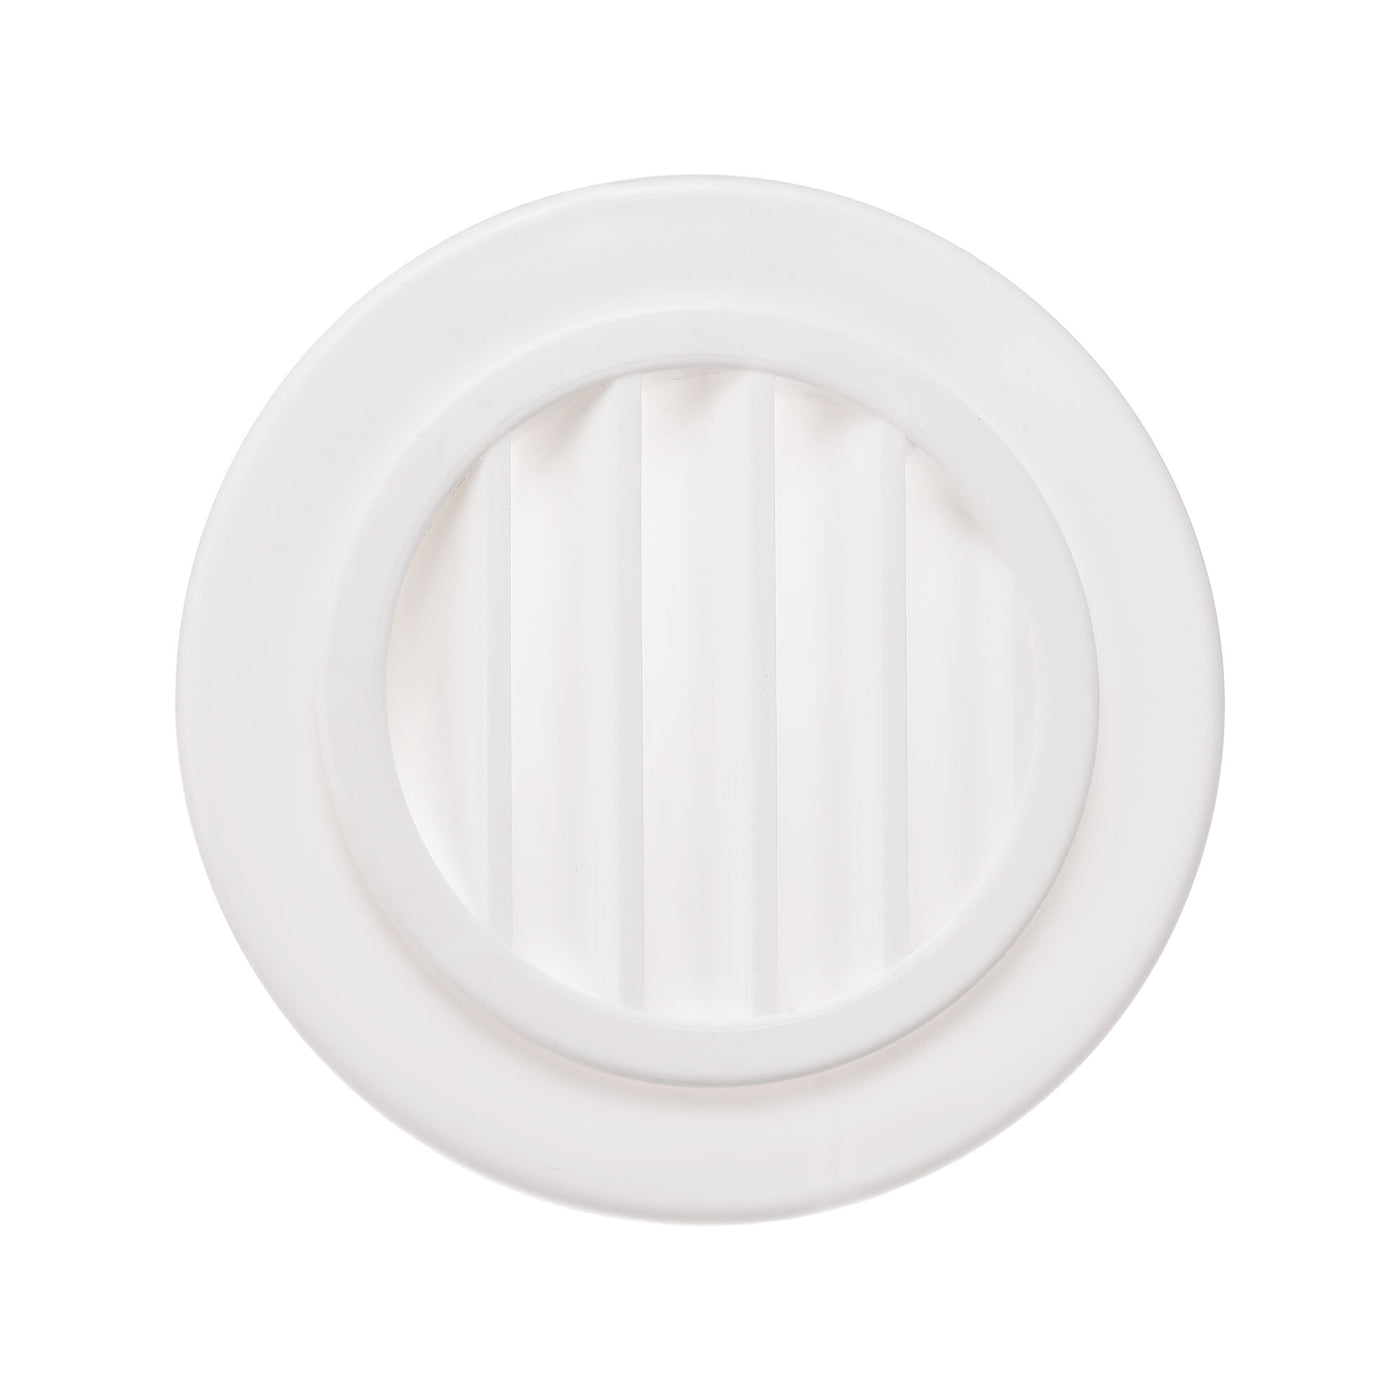 uxcell Uxcell Round Vent Cover, PP Plastic Detachable Air Vent Exhaust Louver for 2.8" - 3.2" Diameter Hole 2pcs